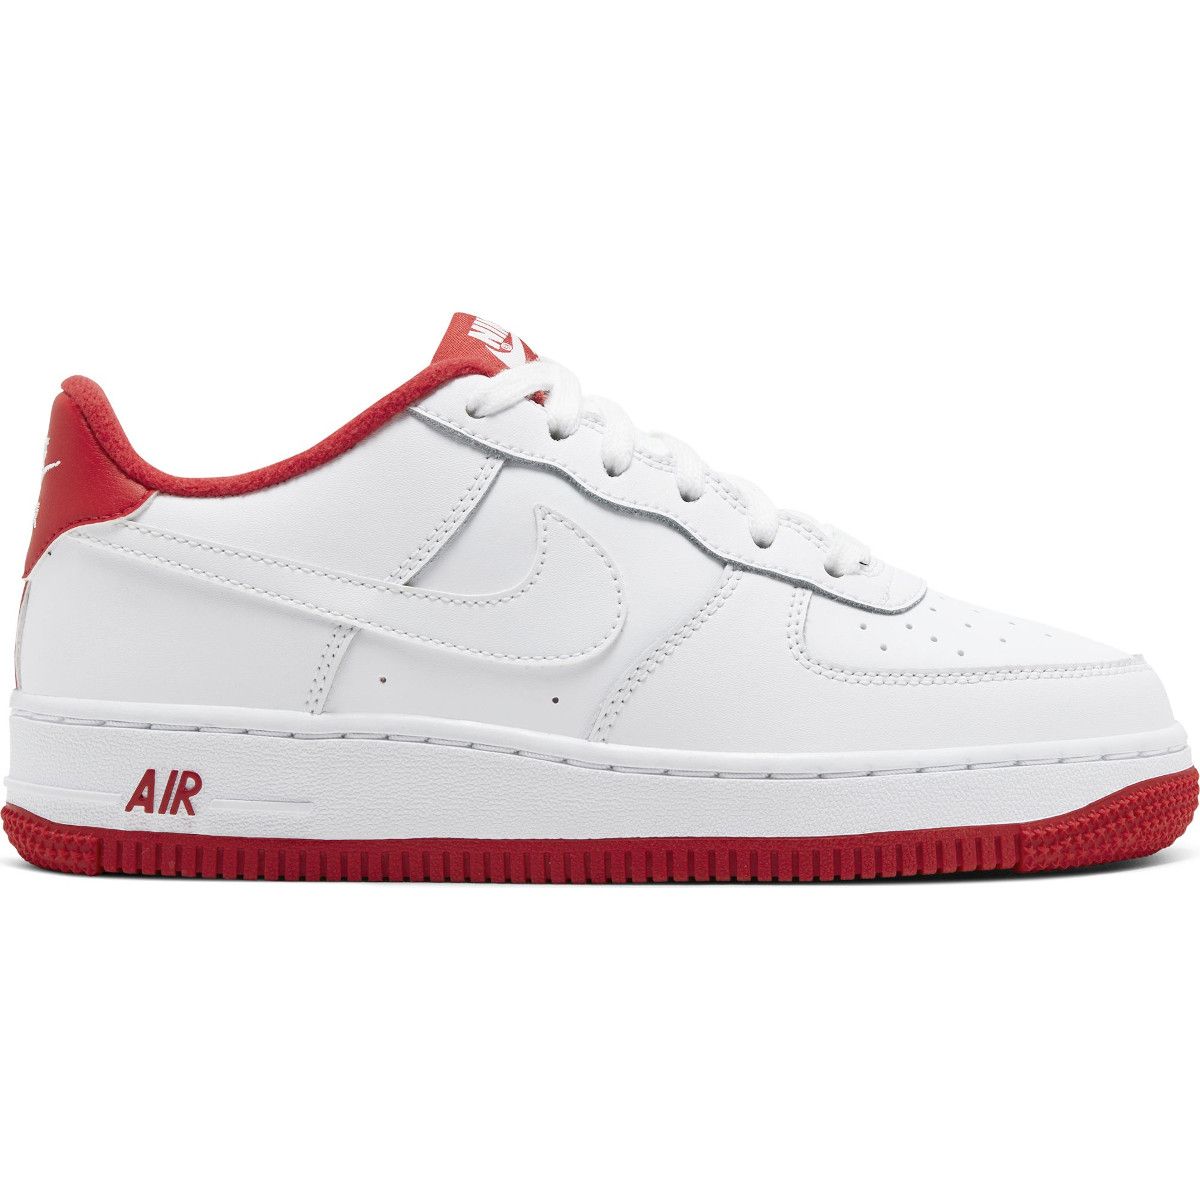 Nike Air Force 1 '07 LV8 Athletic Club Mens Shoes Size 8-12 new